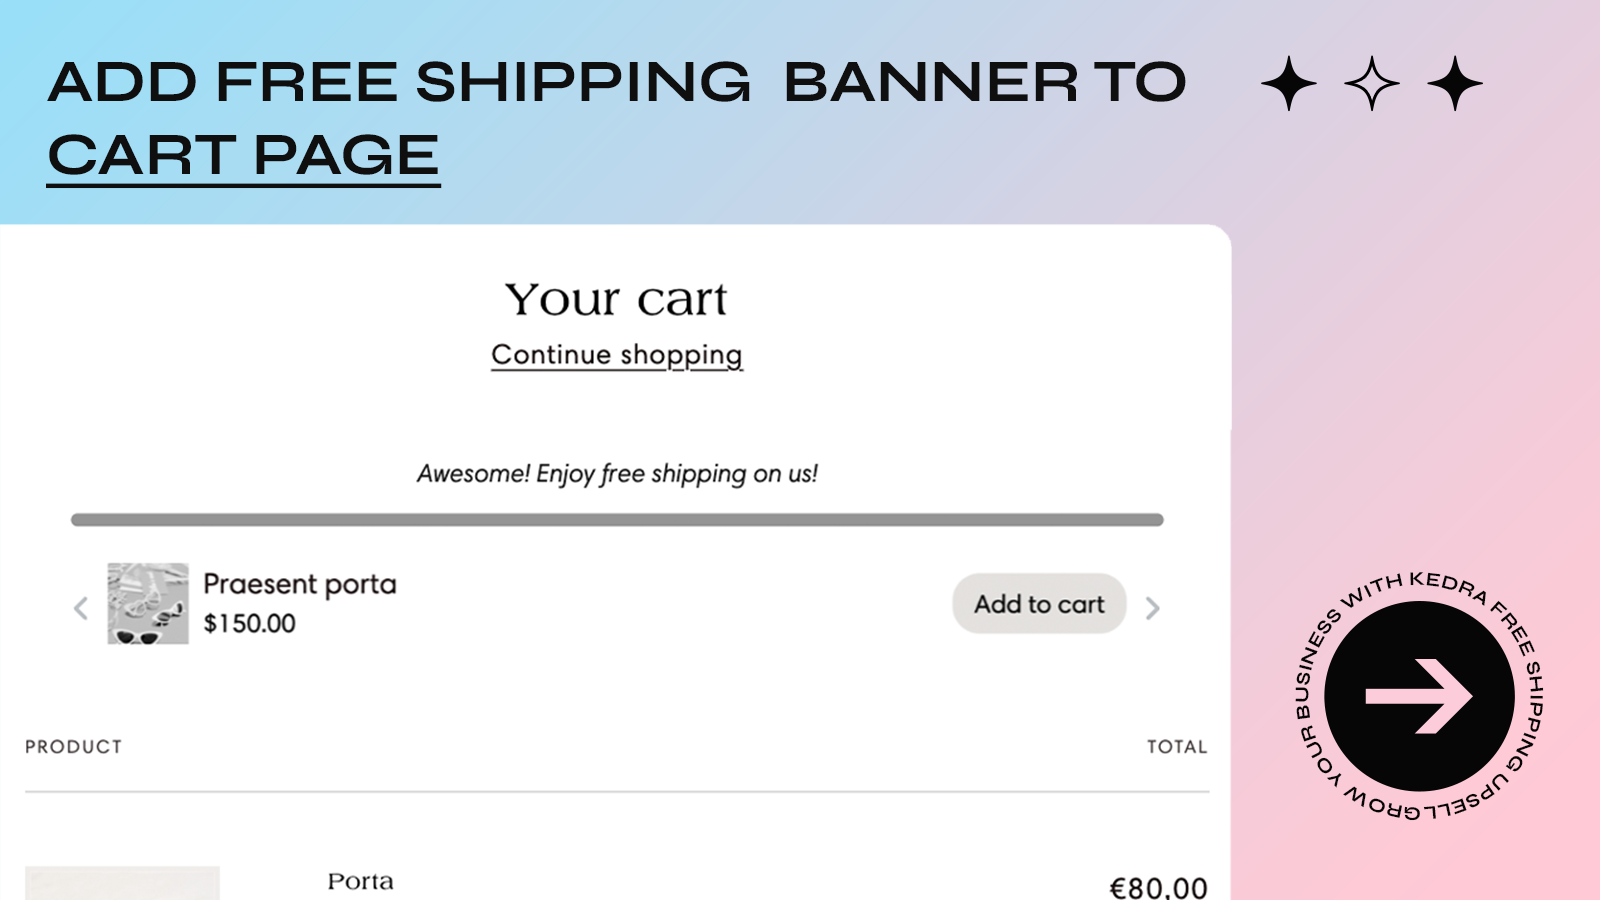 Free shipping banner in cart page